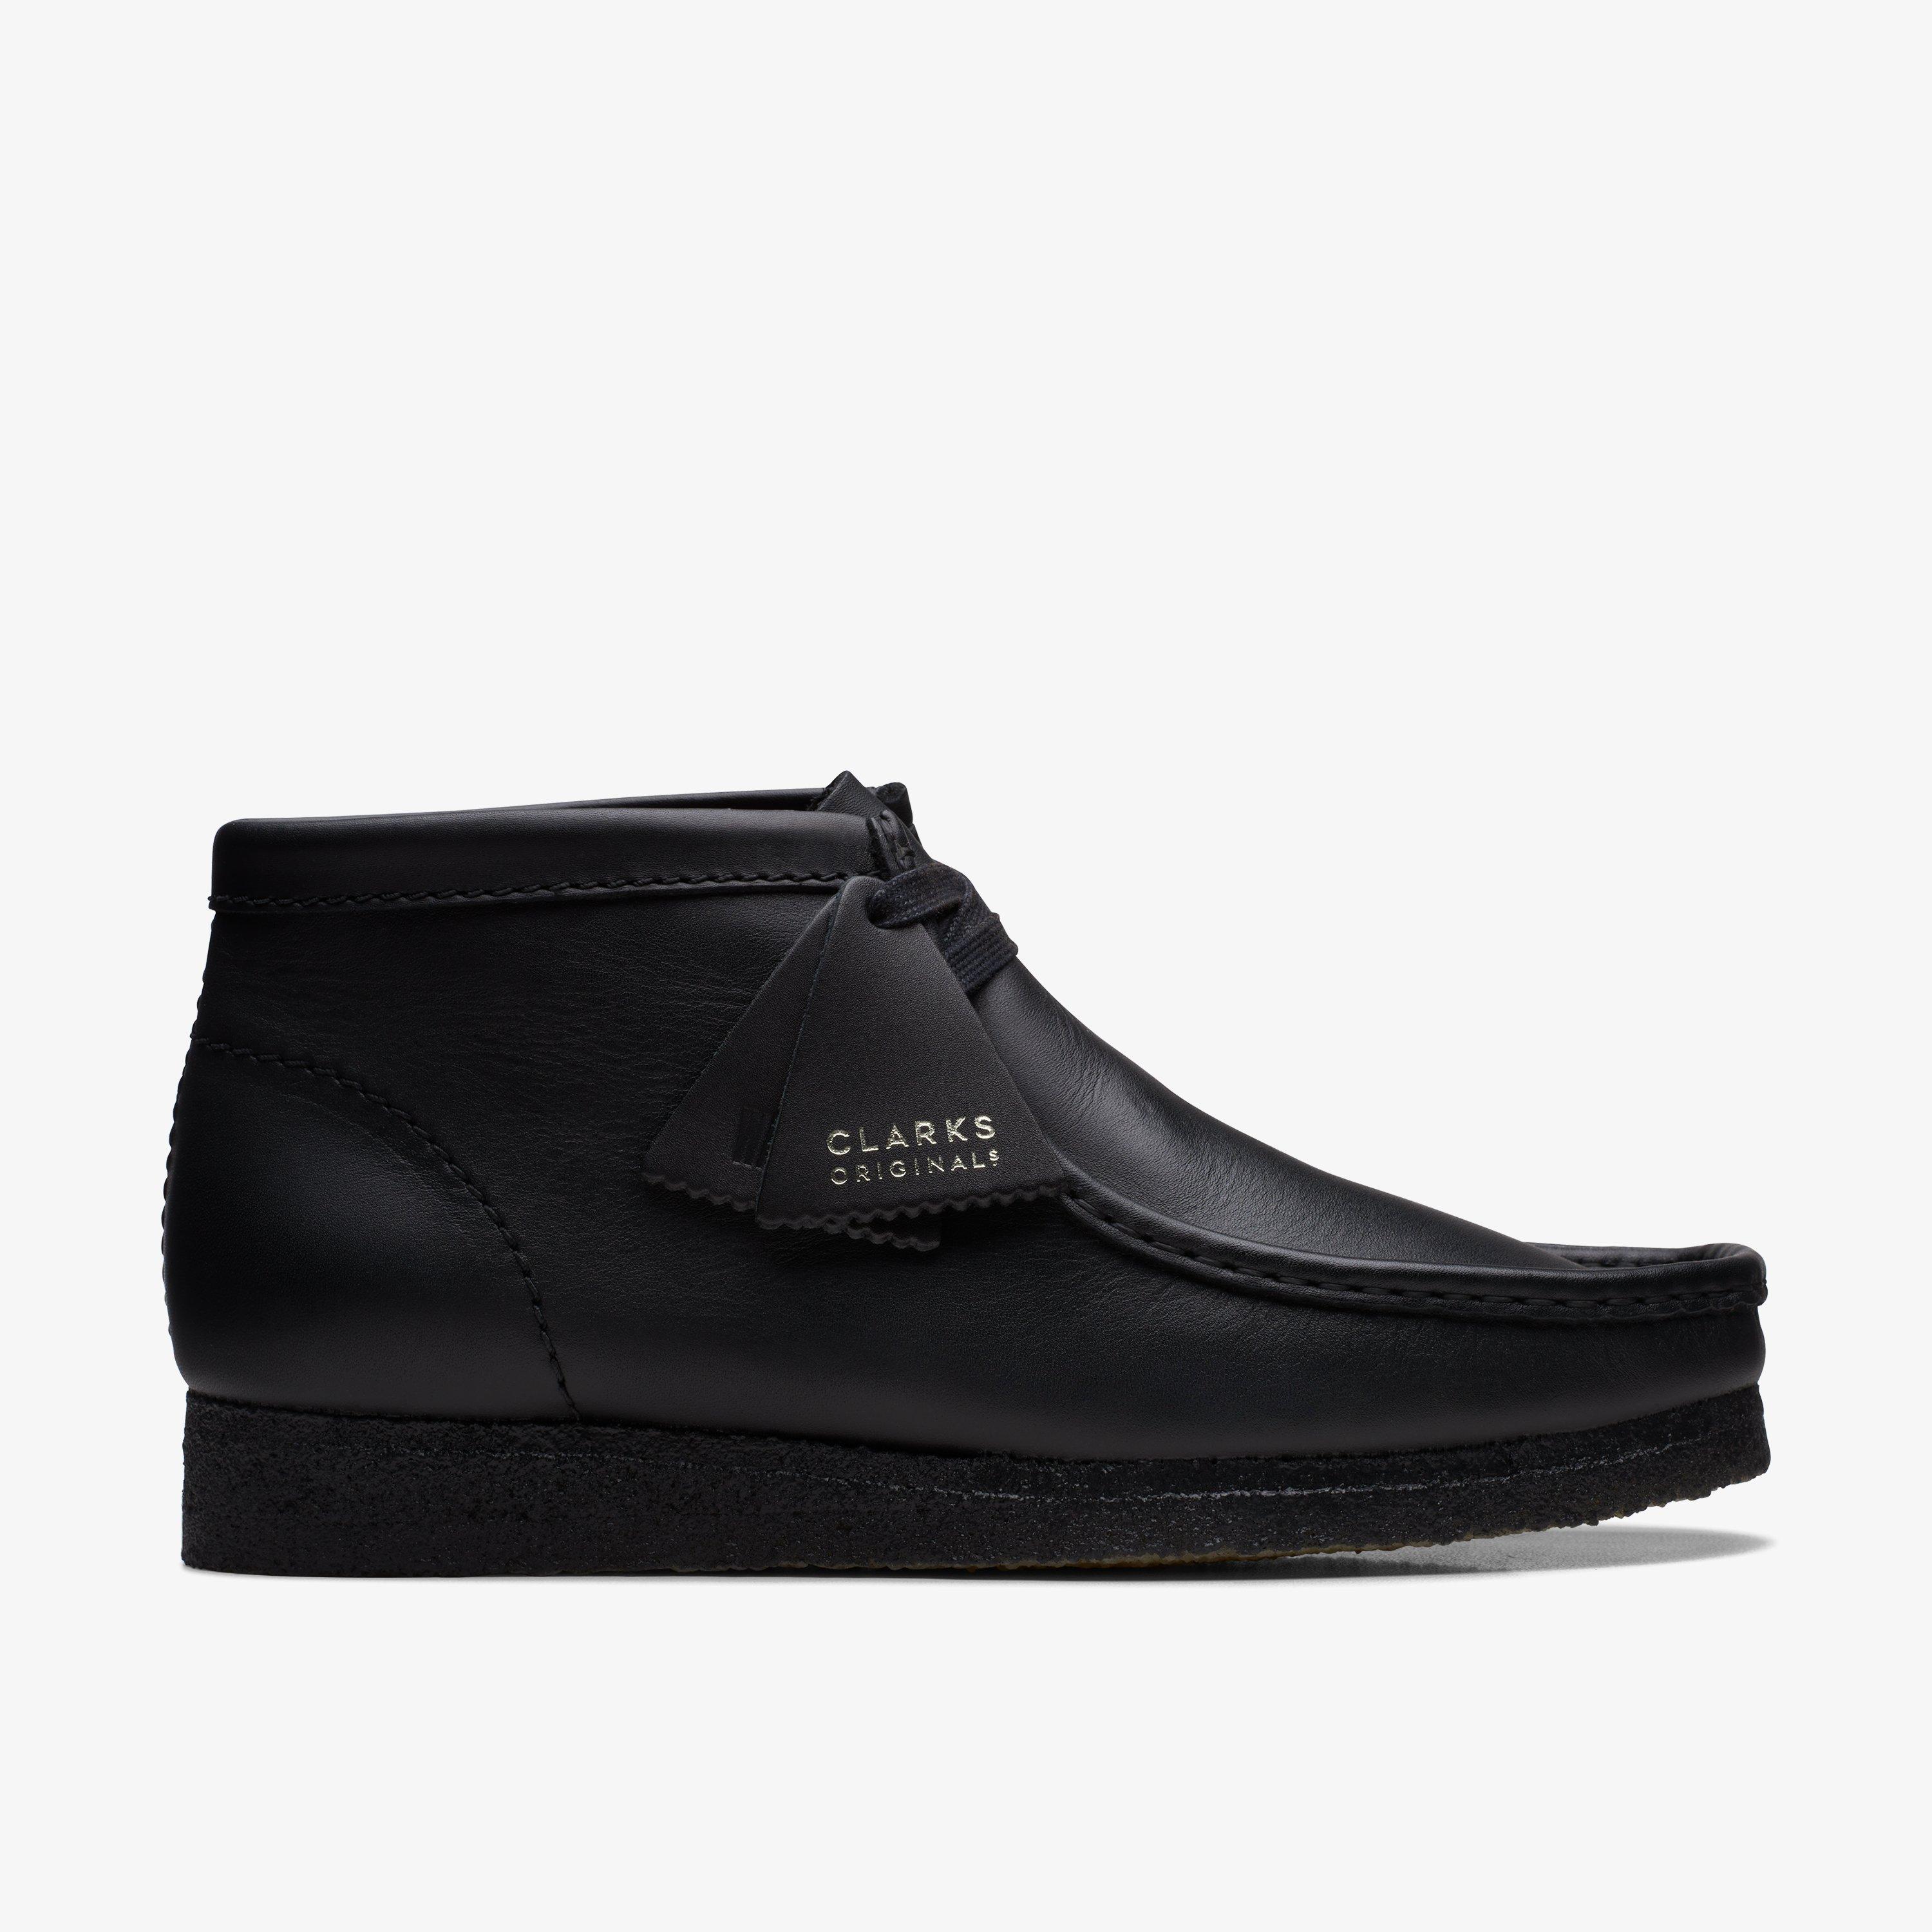 Originals Wallabees - Leather Wallabee Shoes | Clarks US